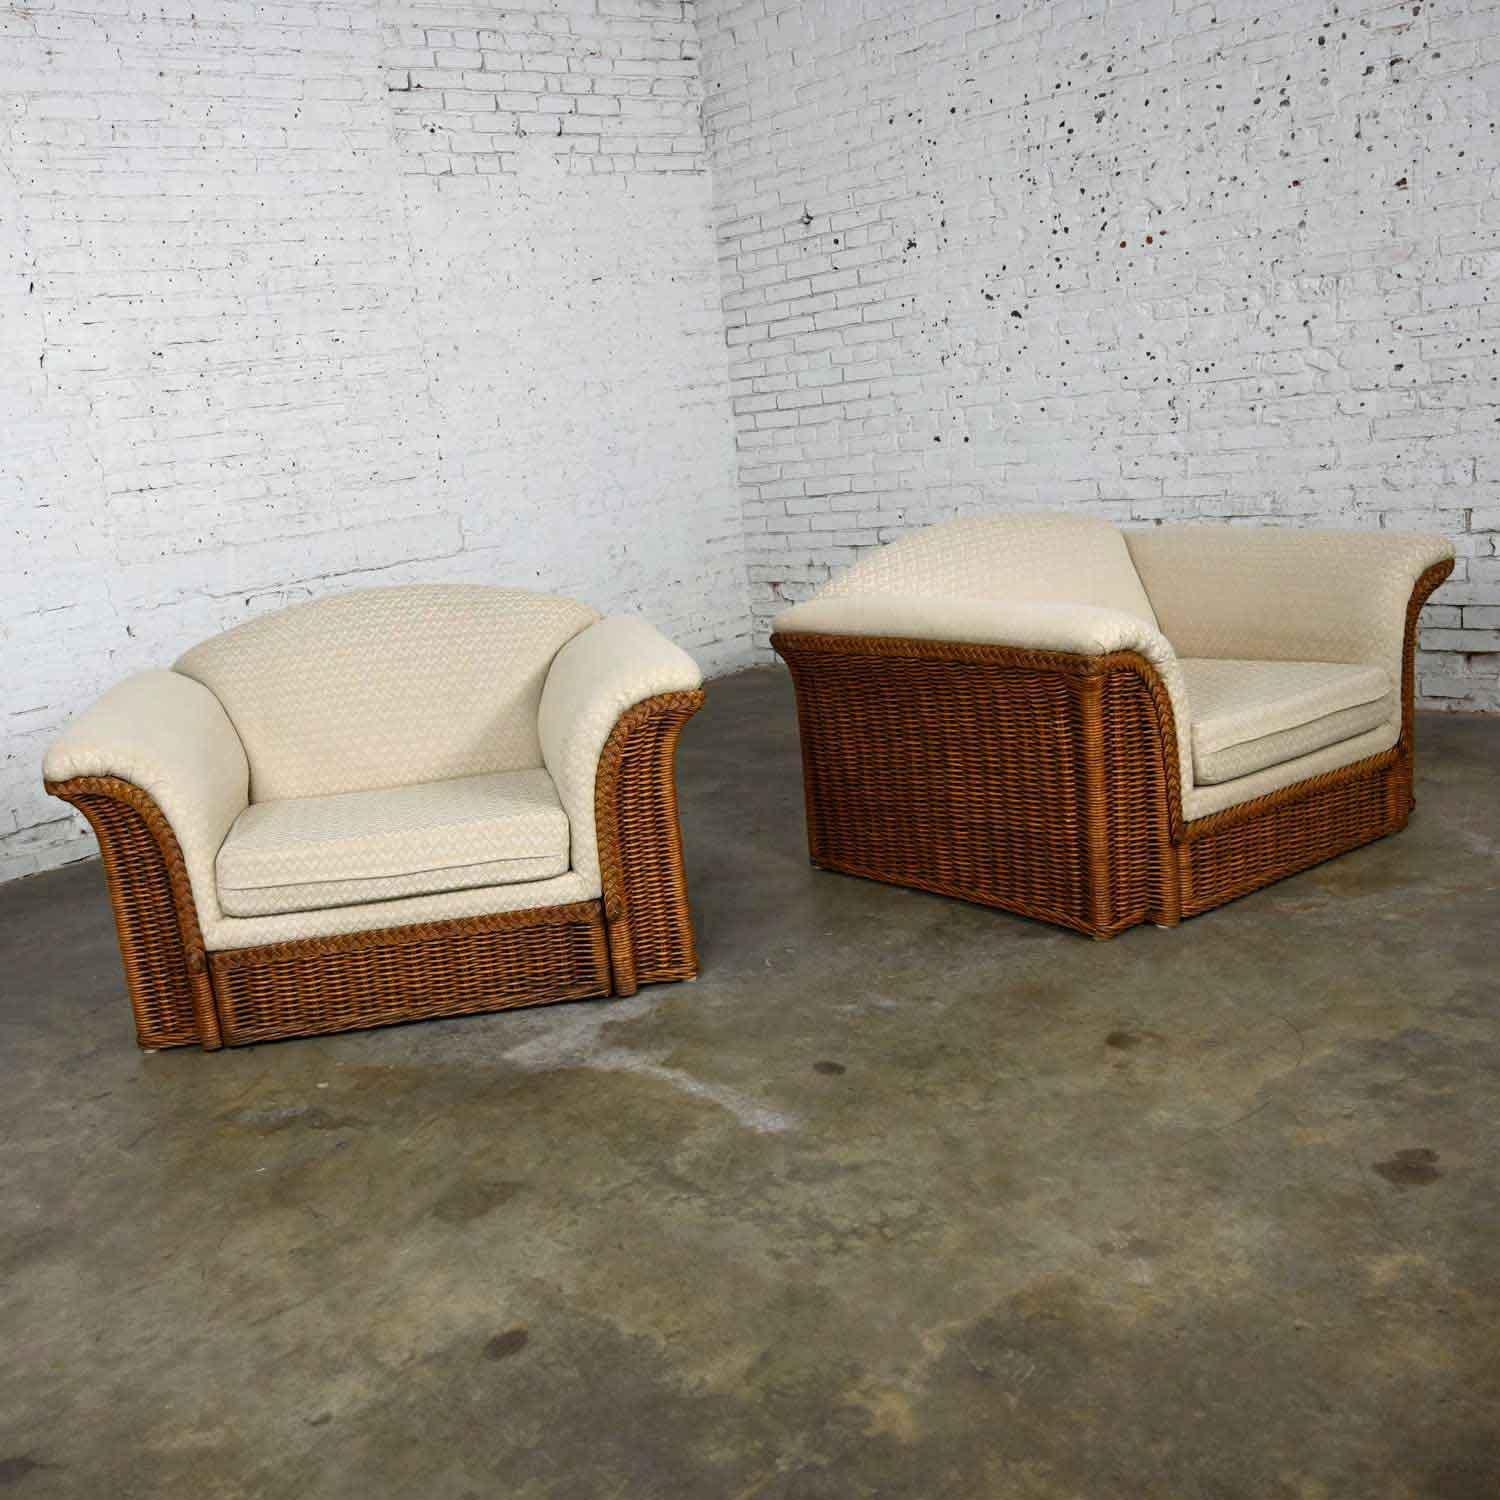 Fabulous pair of rattan wicker oversized lounge chairs wearing their original off-white upholstery in the style of Michael Taylor. Beautiful condition, keeping in mind that these are vintage and not new so will have signs of use and wear. The